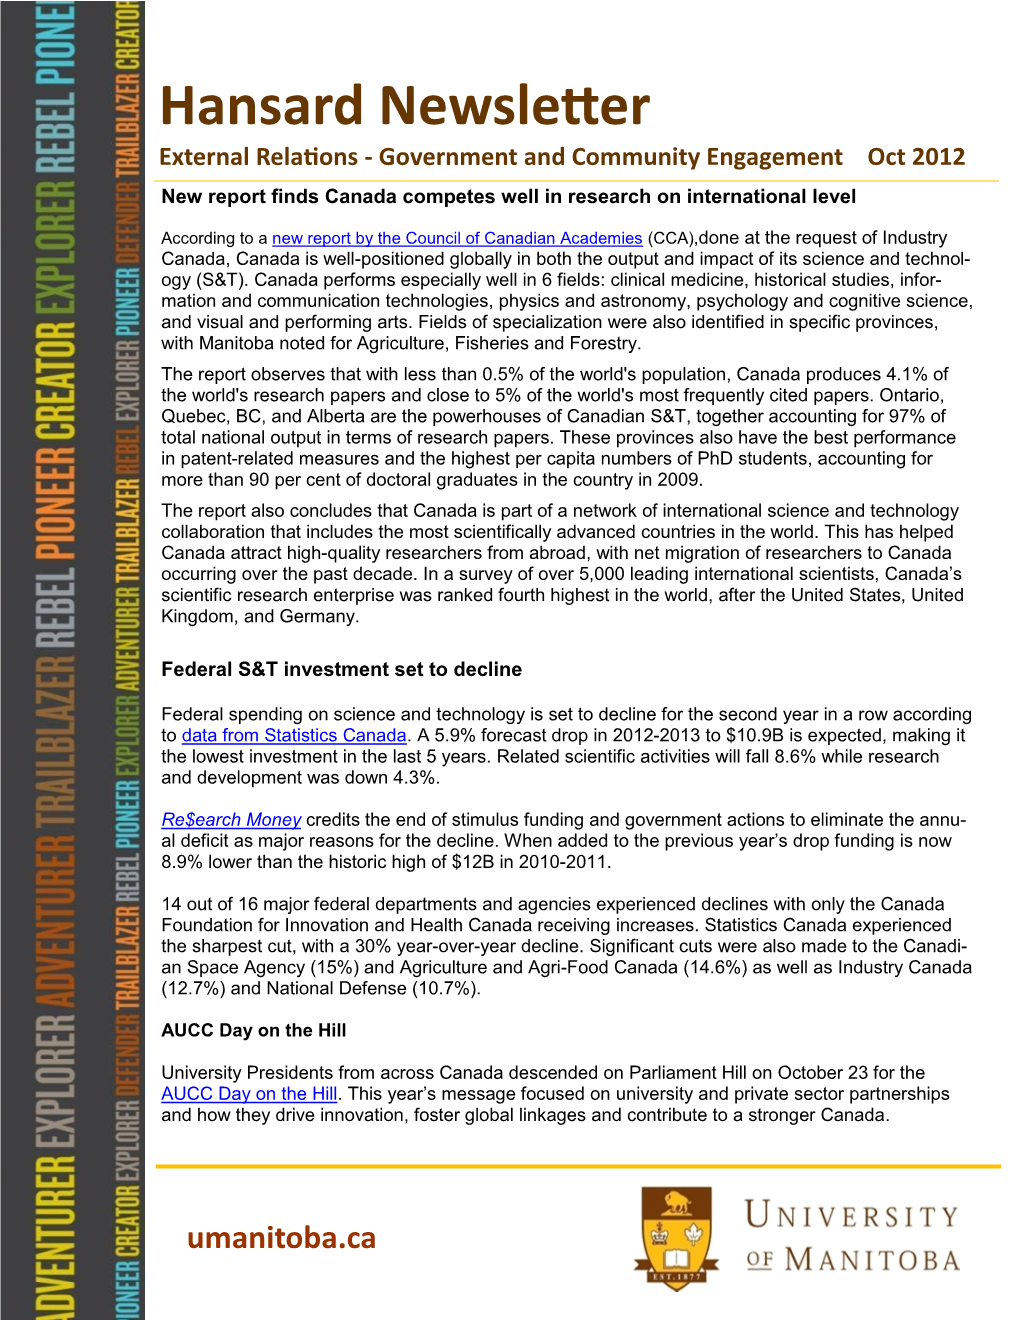 Hansard Newsletter External Relations - Government and Community Engagement Oct 2012 New Report Finds Canada Competes Well in Research on International Level